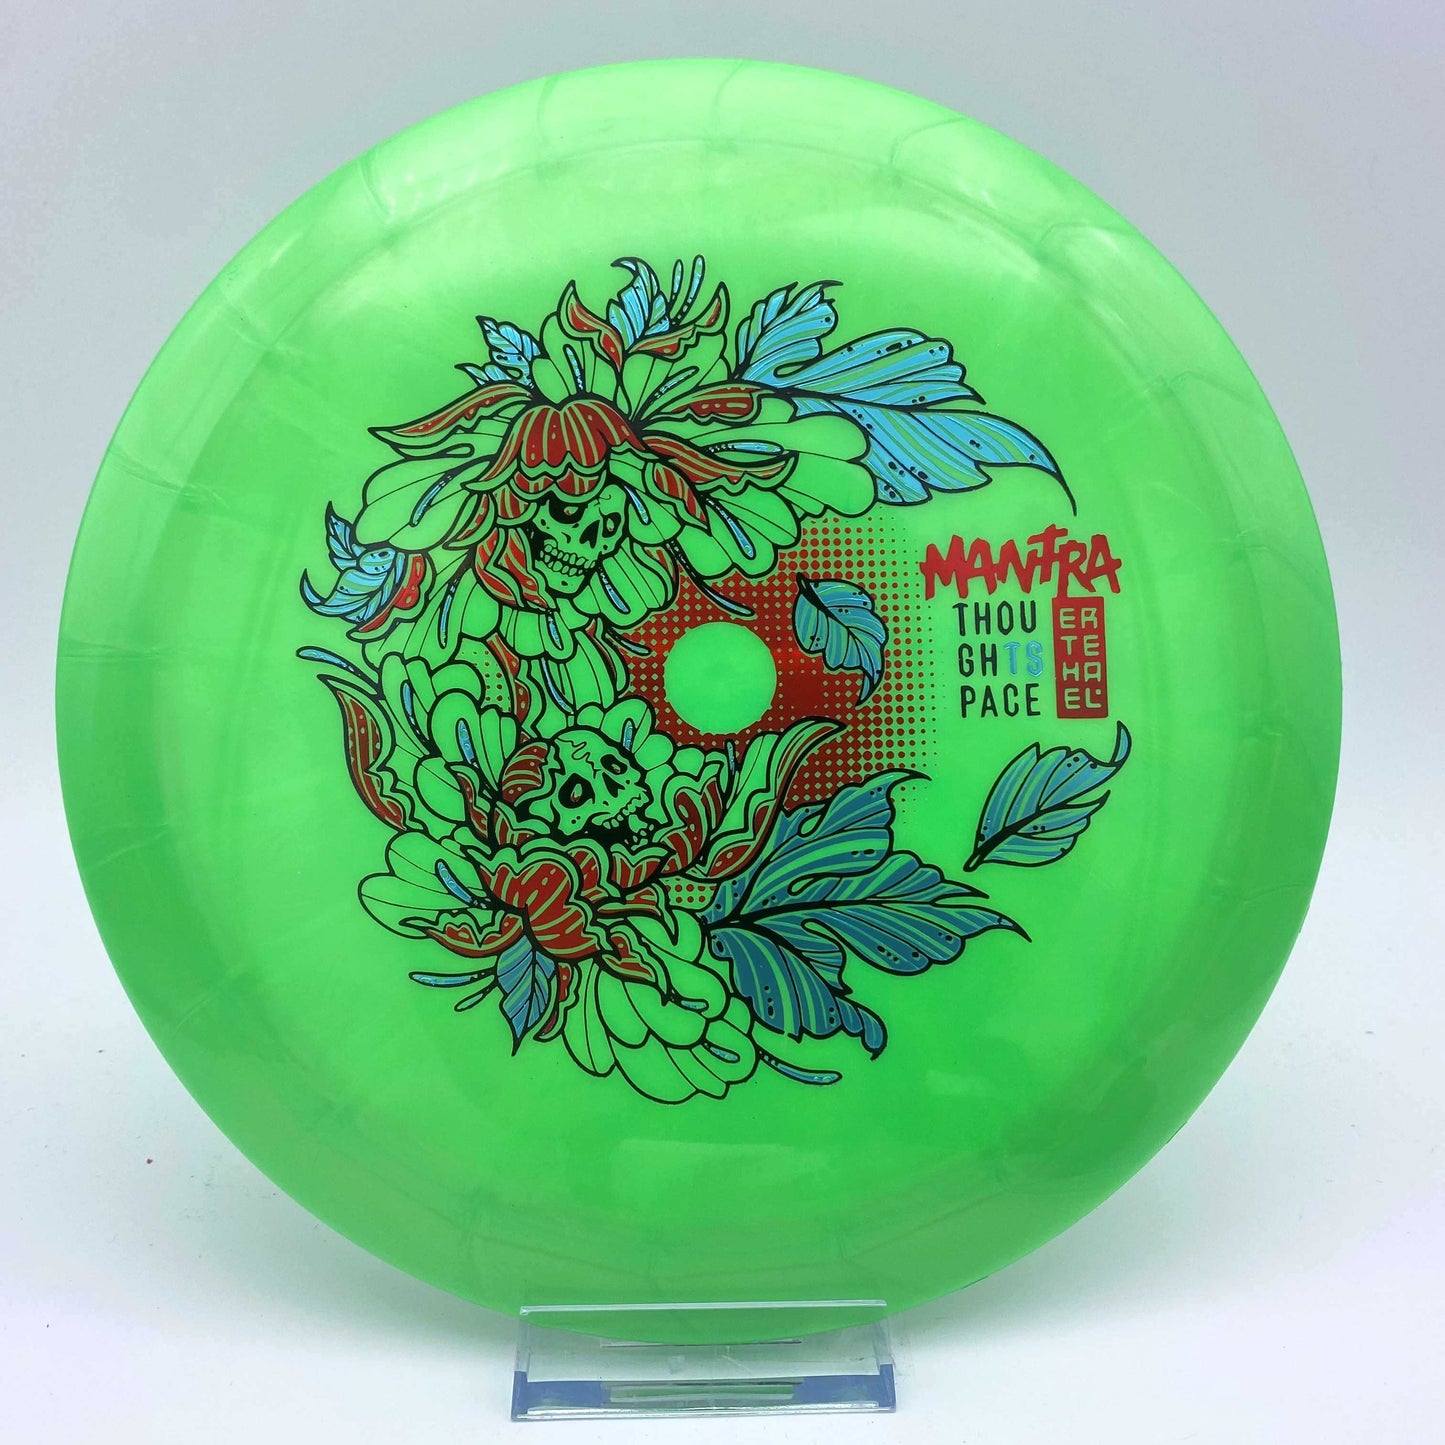 Thought Space Athletics Ethereal Mantra - Disc Golf Deals USA